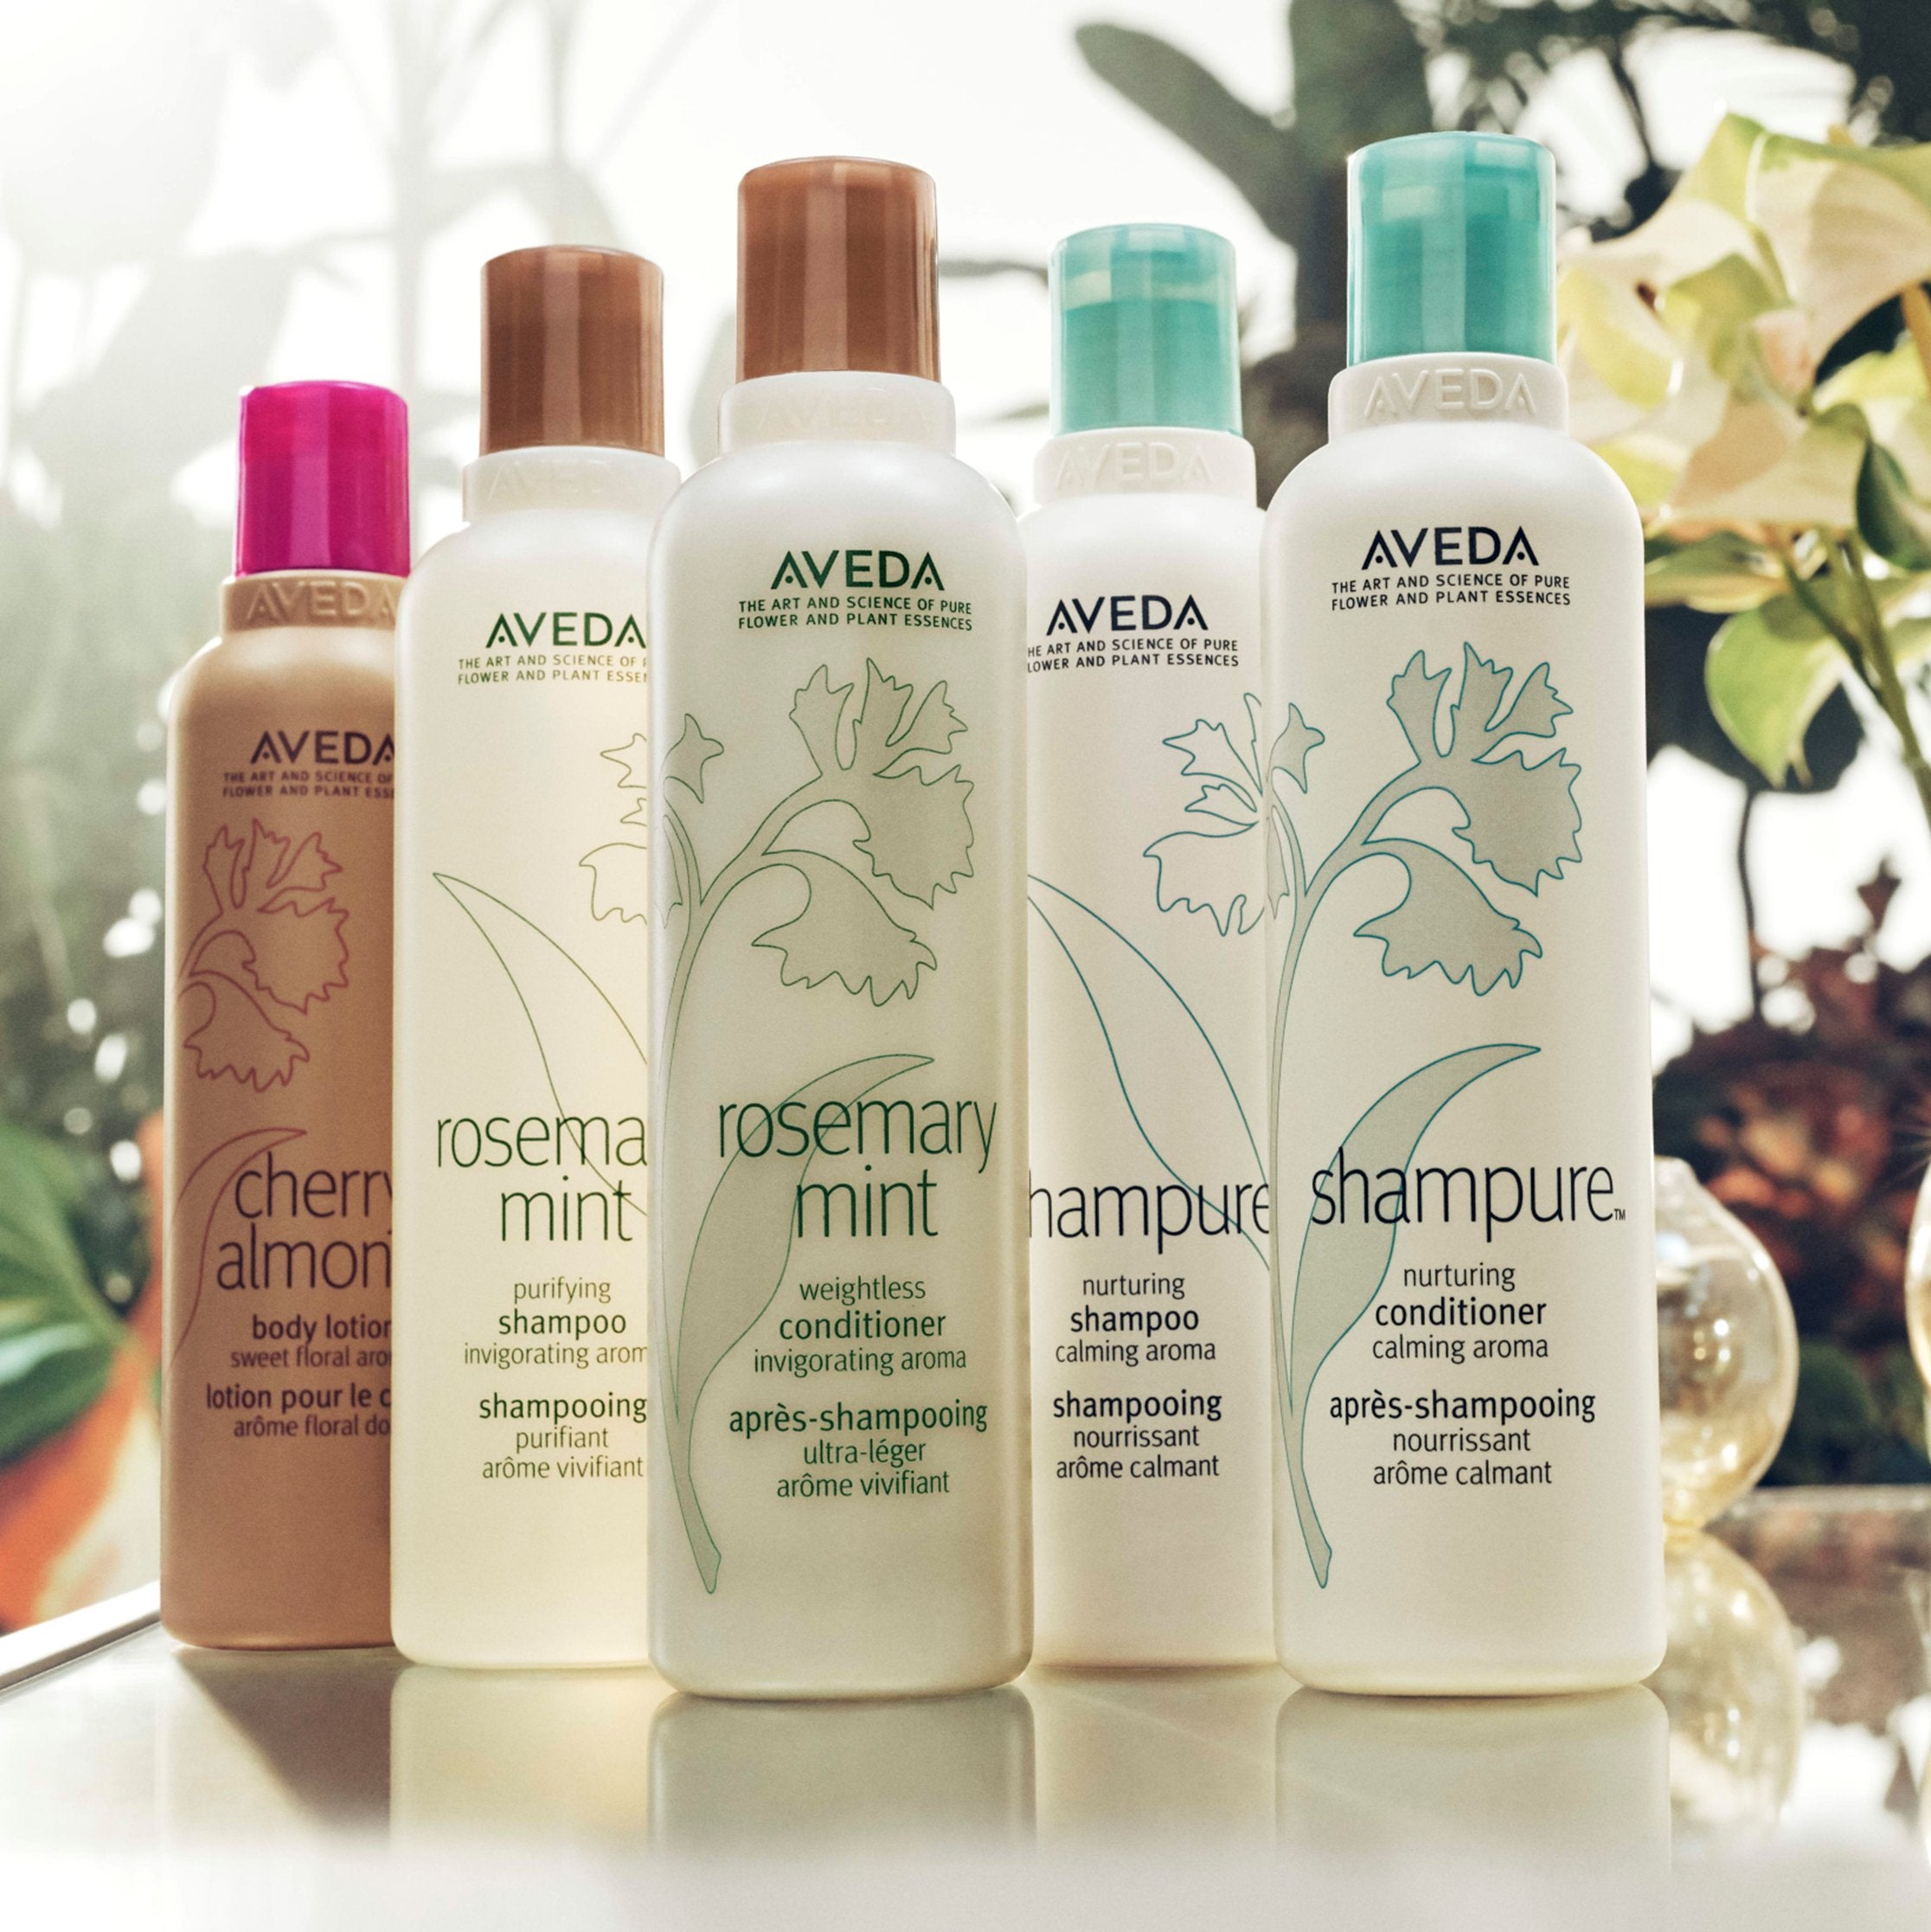 AVEDA PRODUCTS